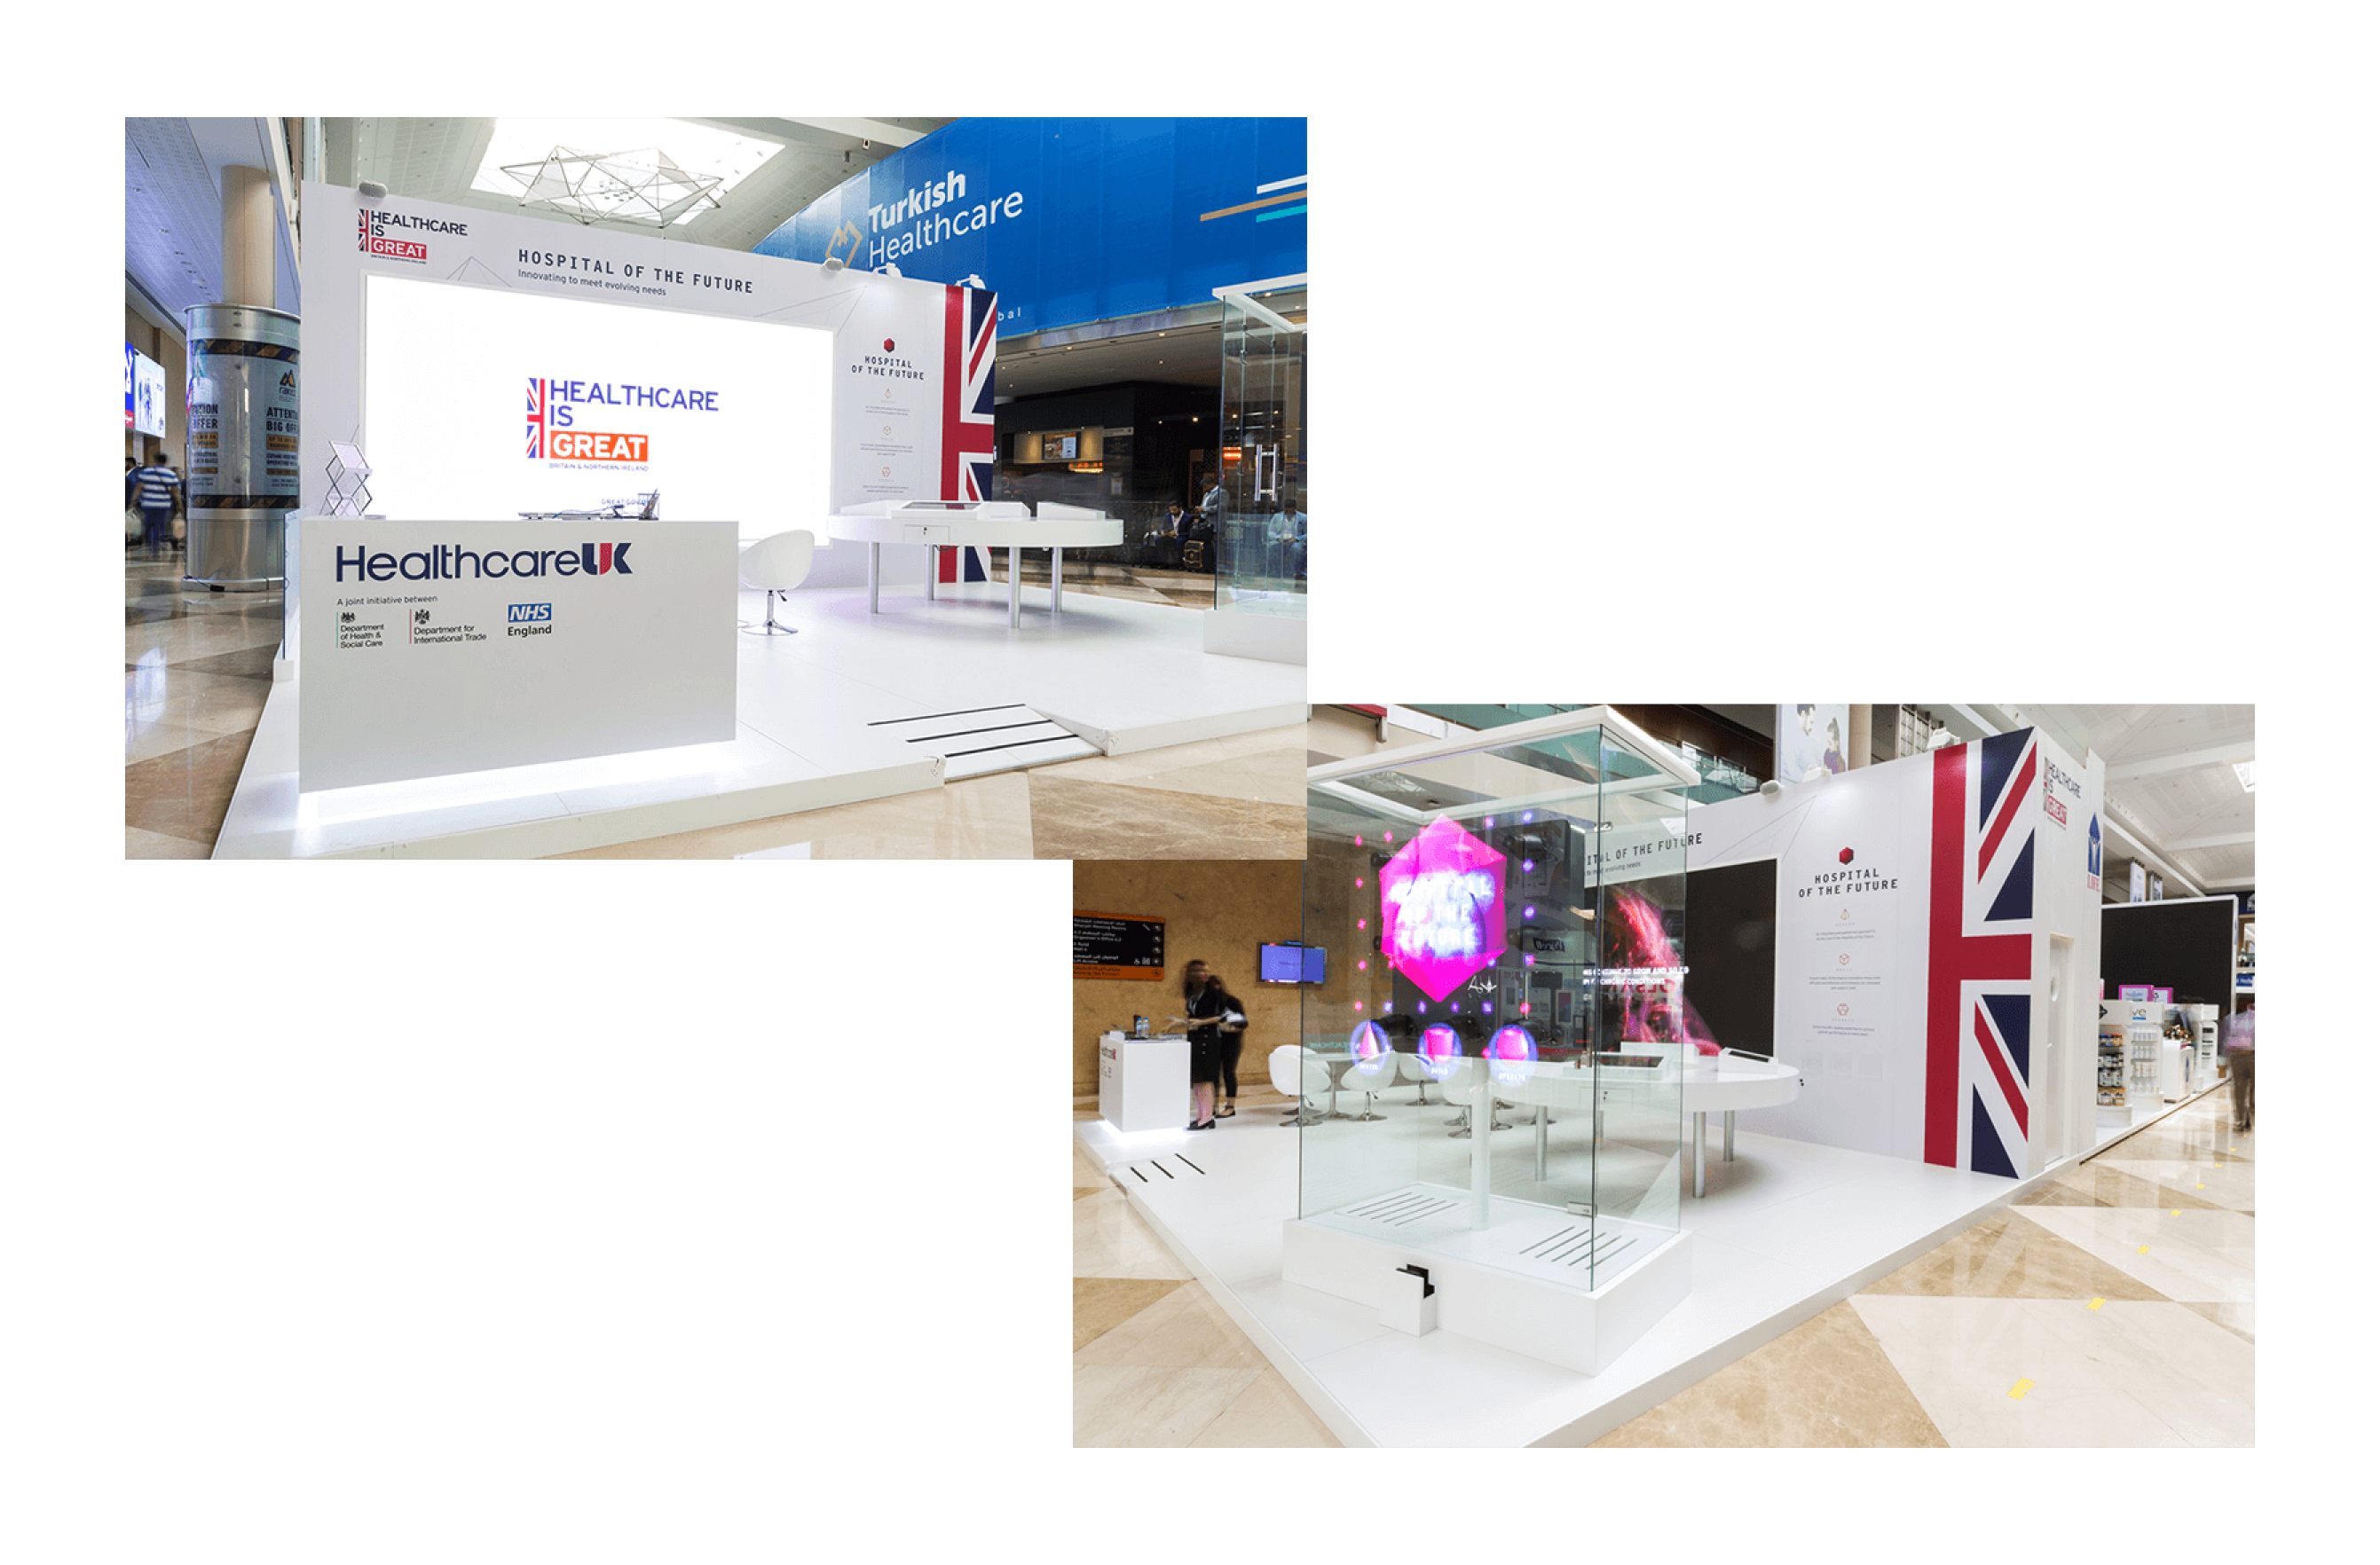 photos of the event stand in situ showcasing a bright screen and the hologram in action